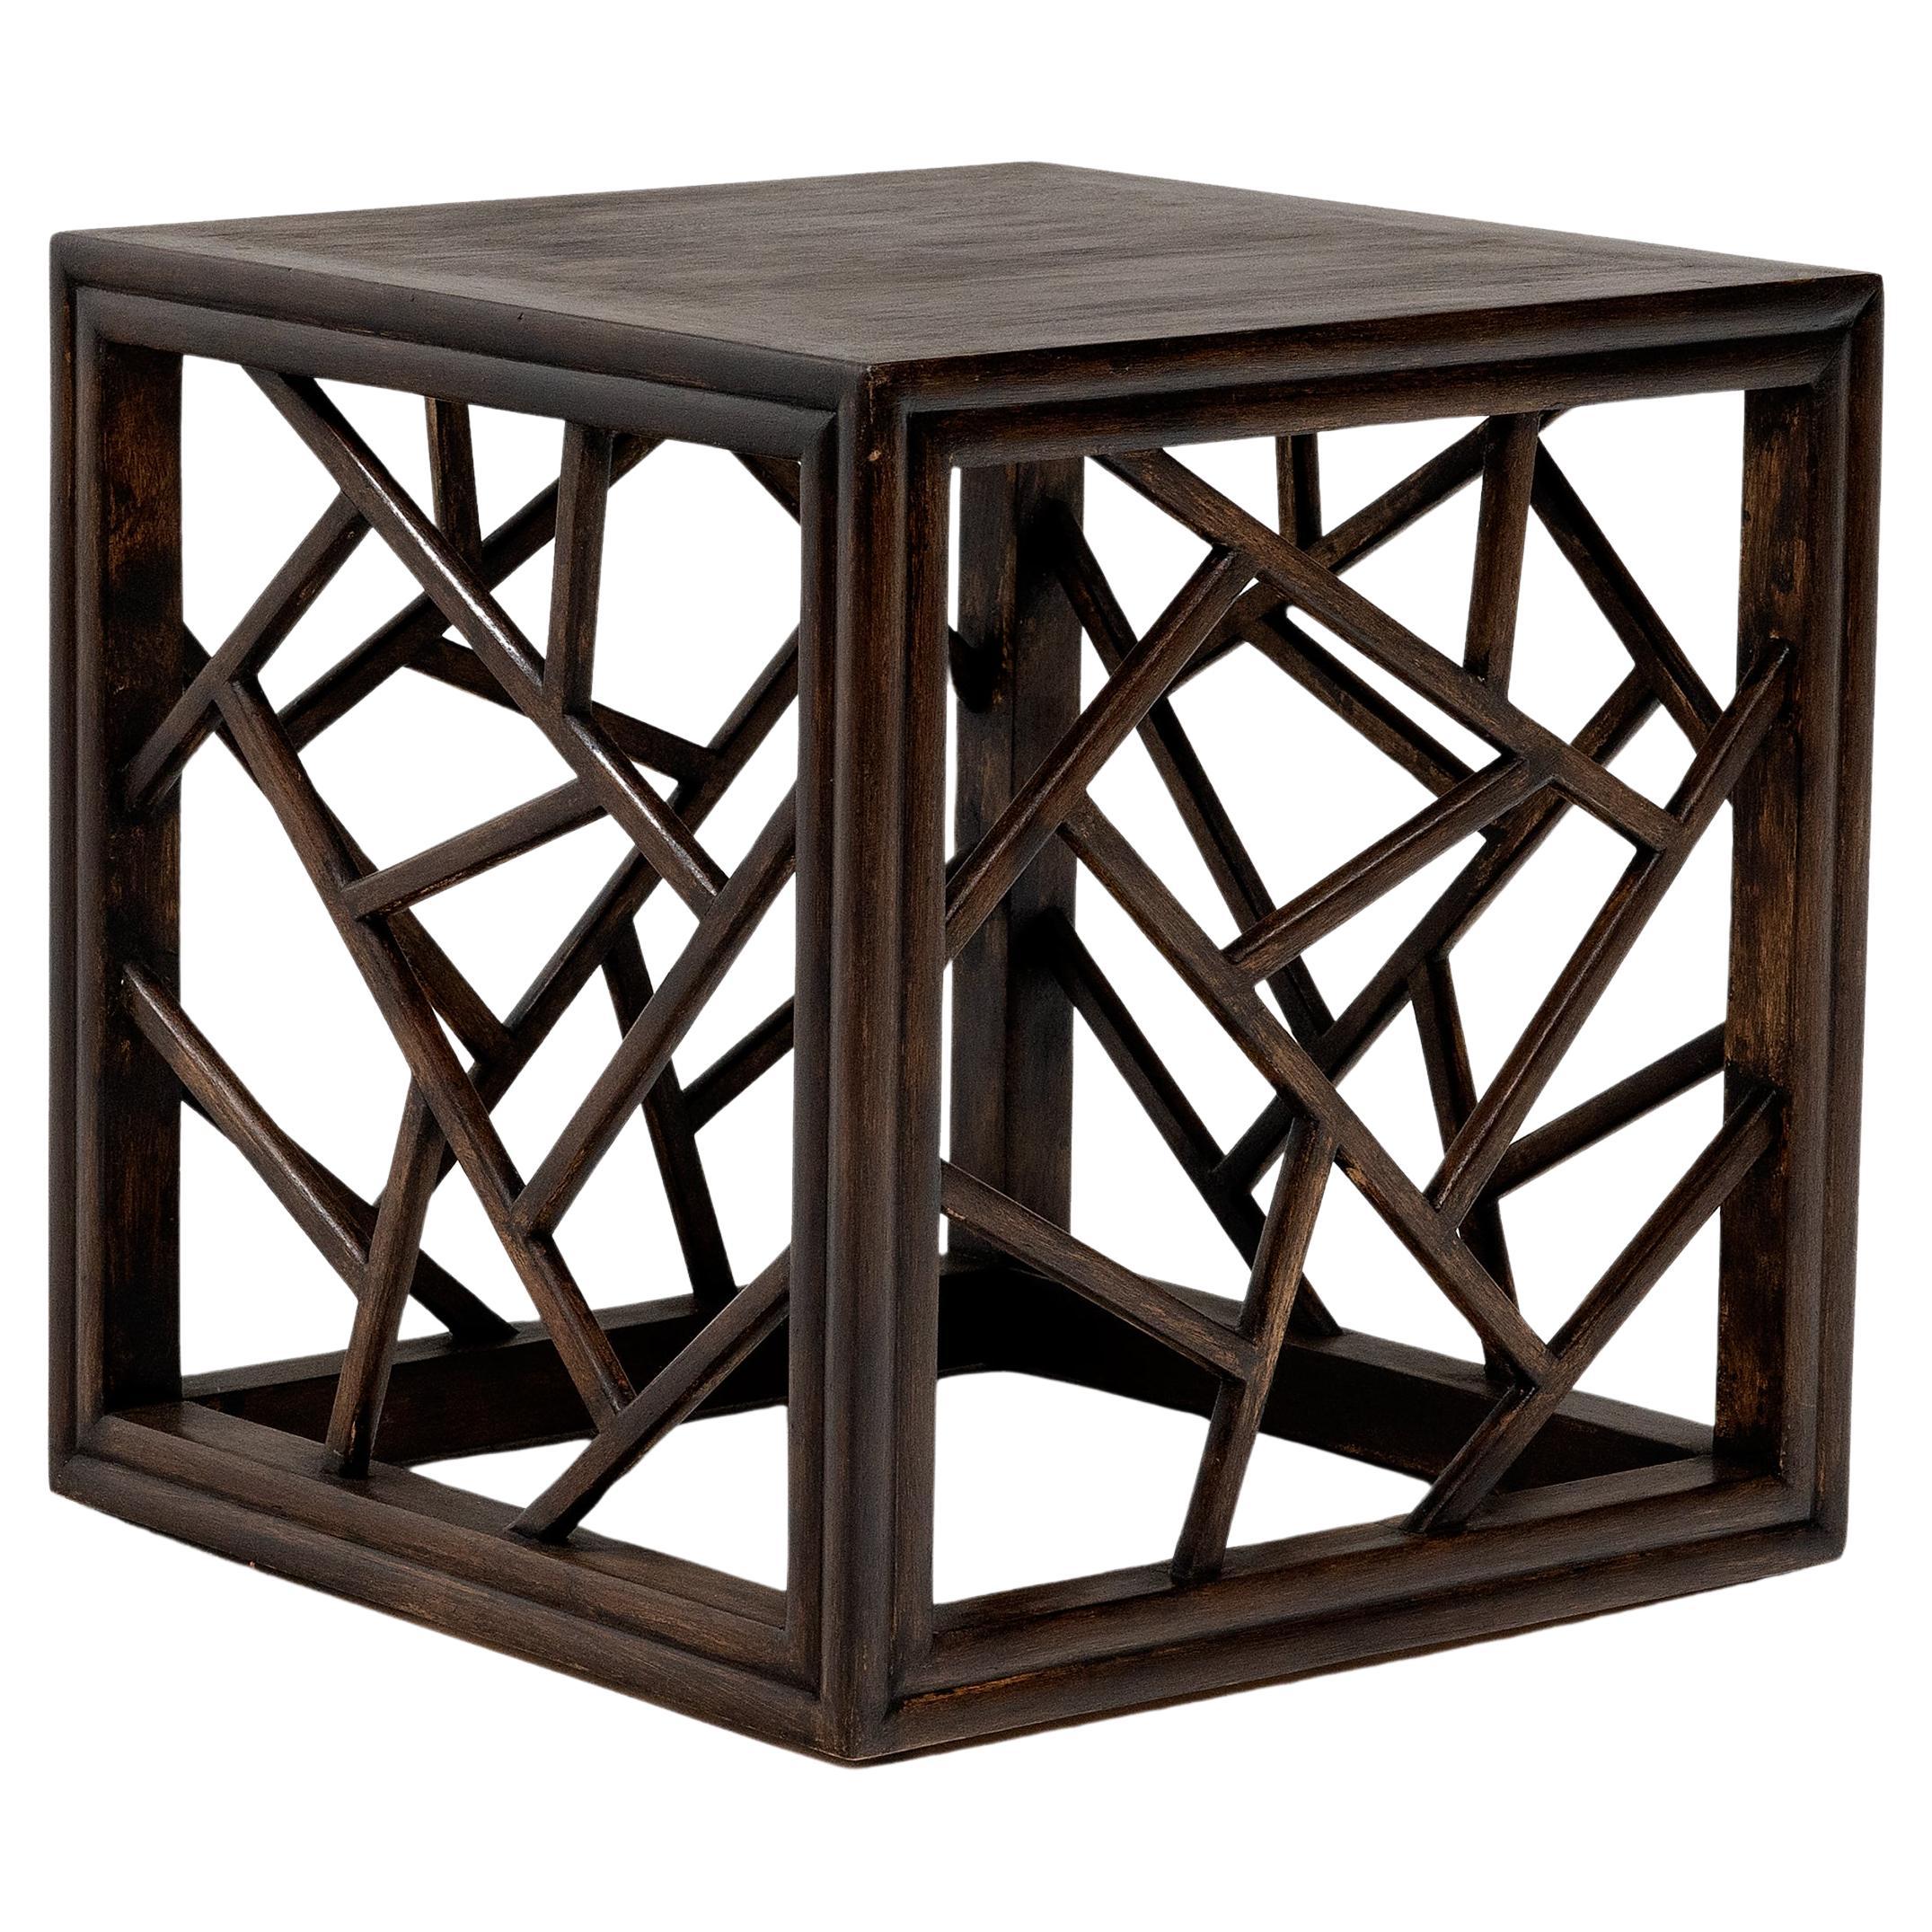 Chinese Cracked Ice Square Table, c. 1900 For Sale